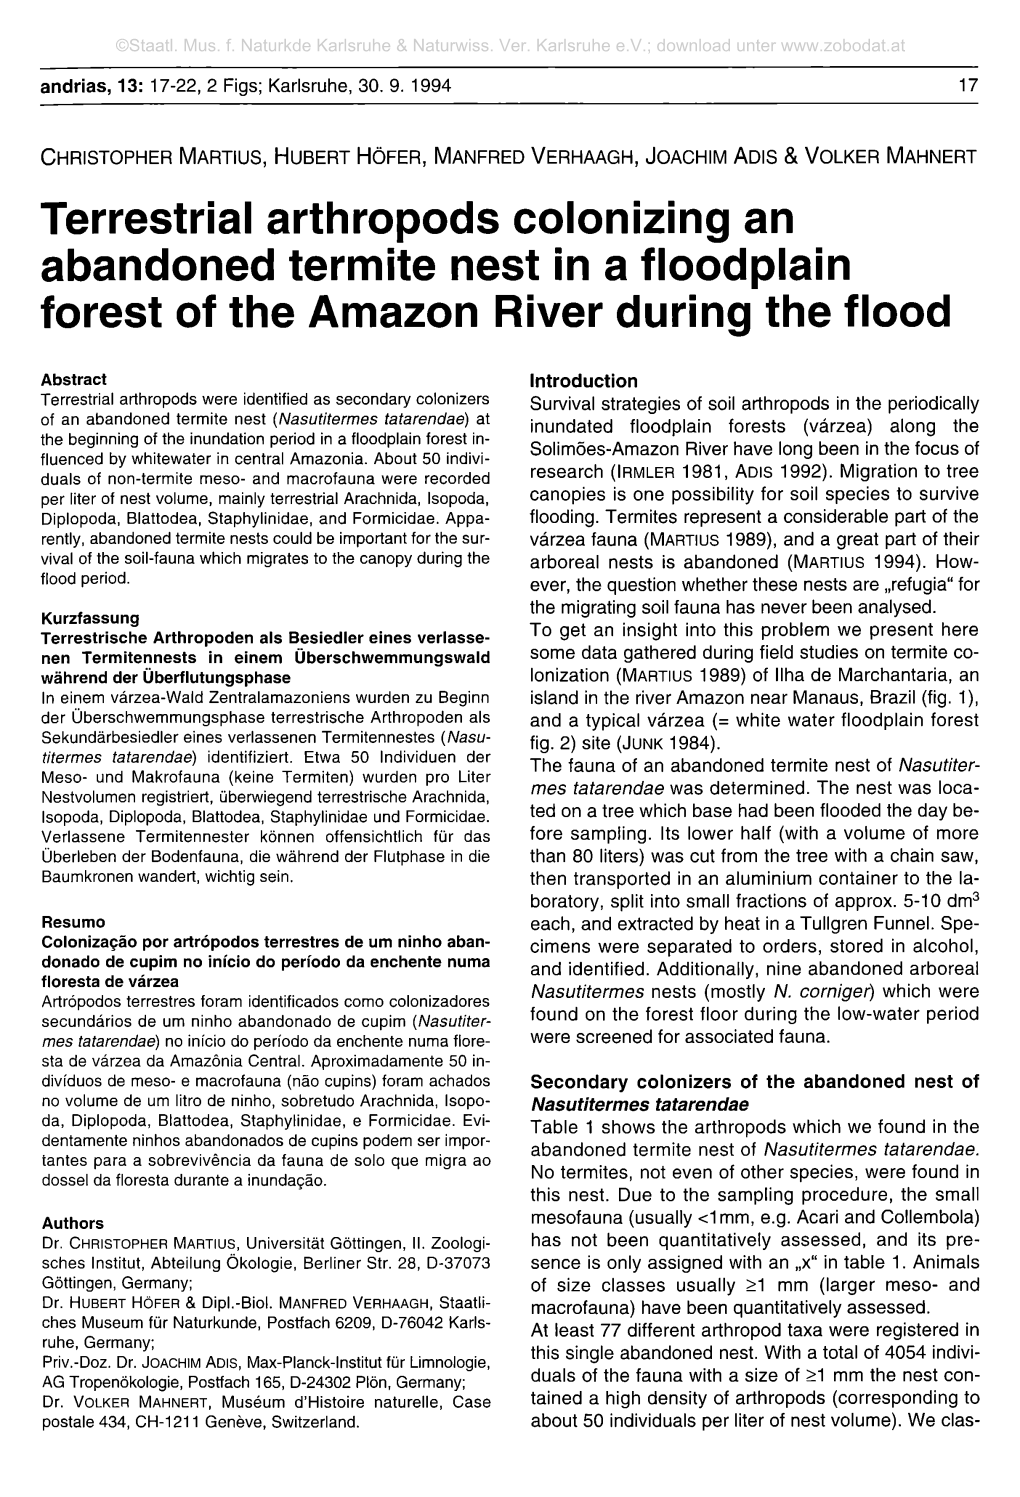 Terrestrial Arthropods Colonizing an Abandoned Termite Nest in a Floodplain Forest of the Amazon River During the Flood